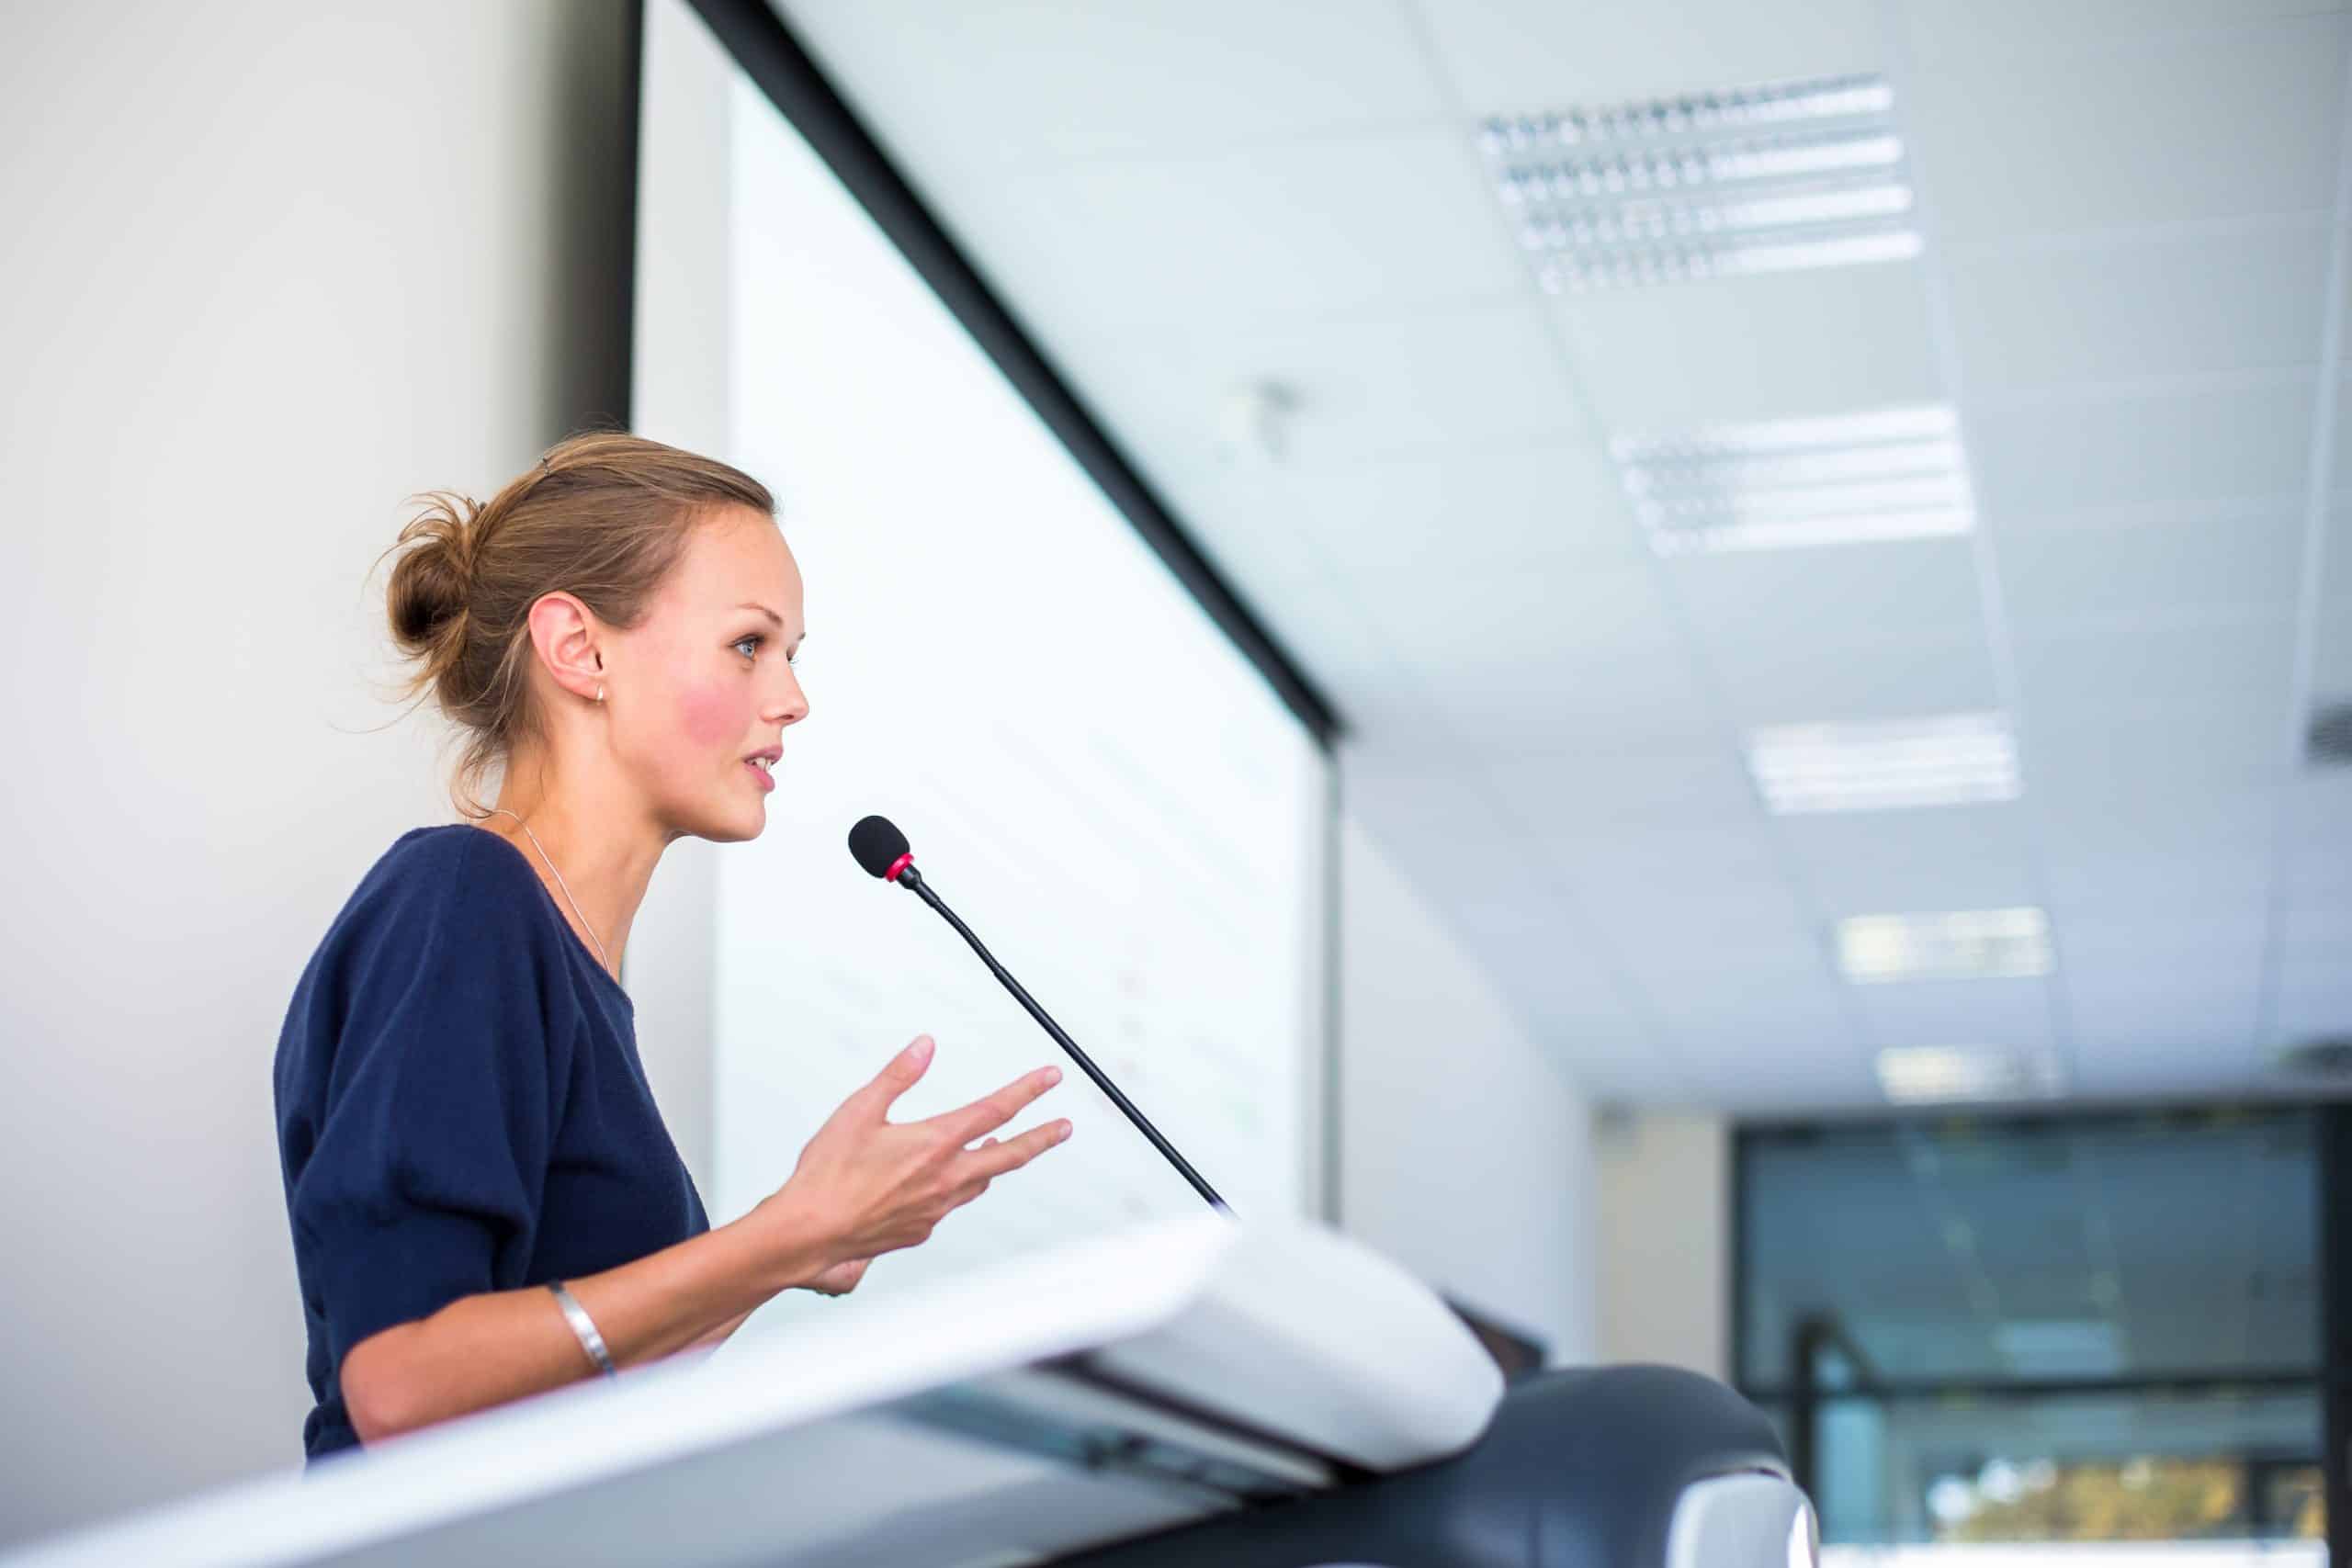 young business woman giving a presentation in a conference/meeting setting